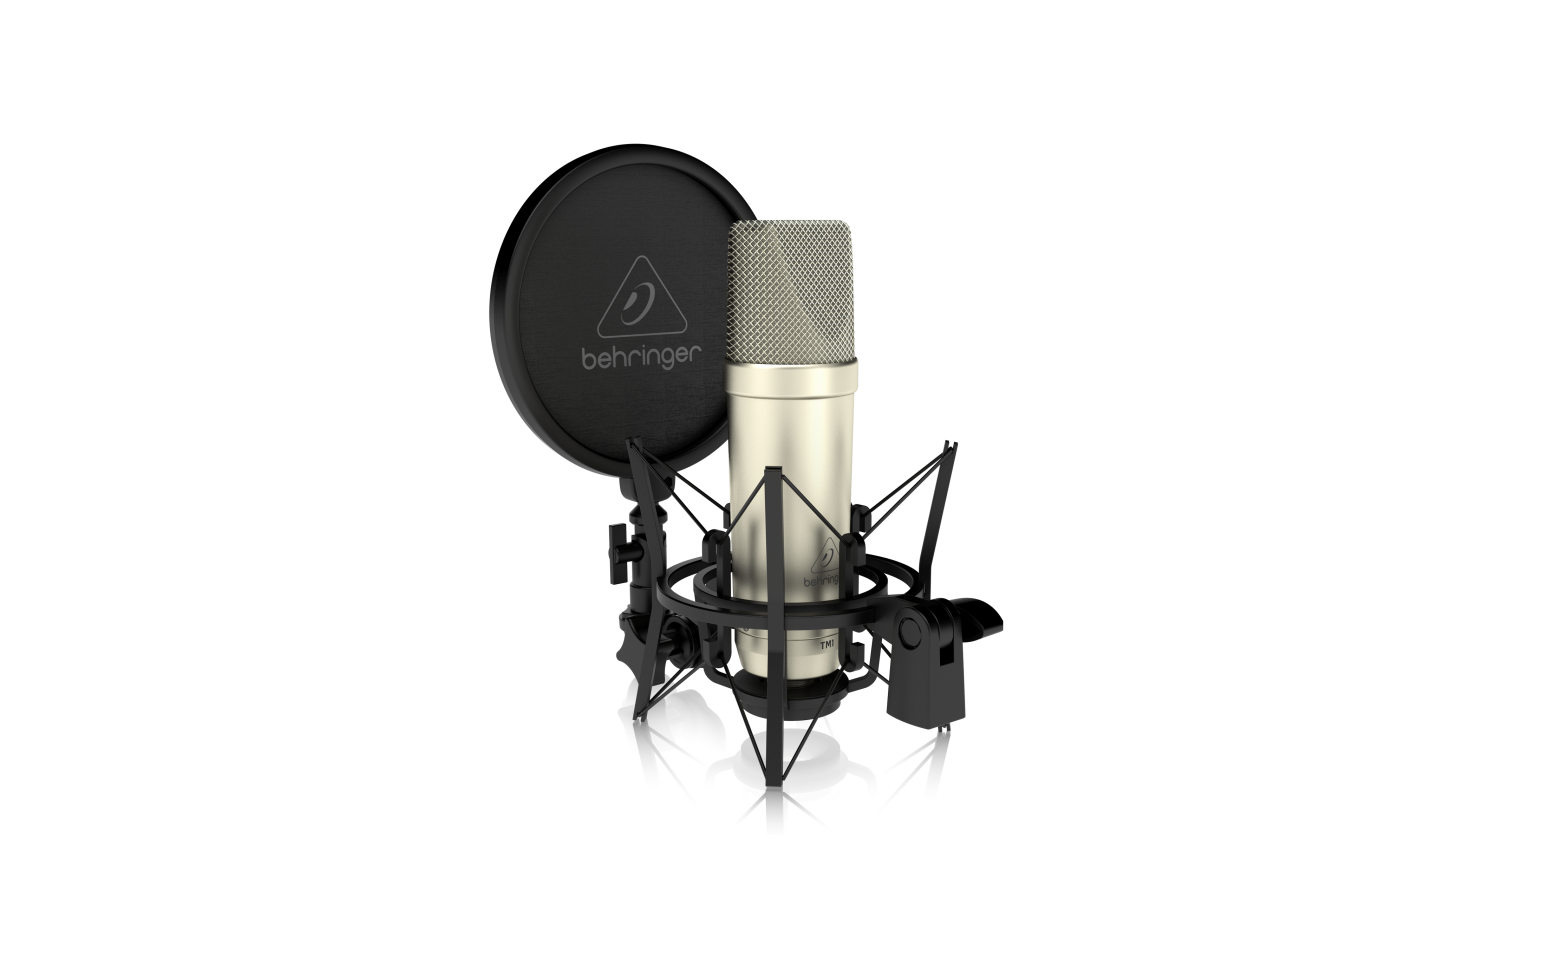 behringer TM1 Complete Recording Package with Large Diaphragm Condenser Microphone User Guide